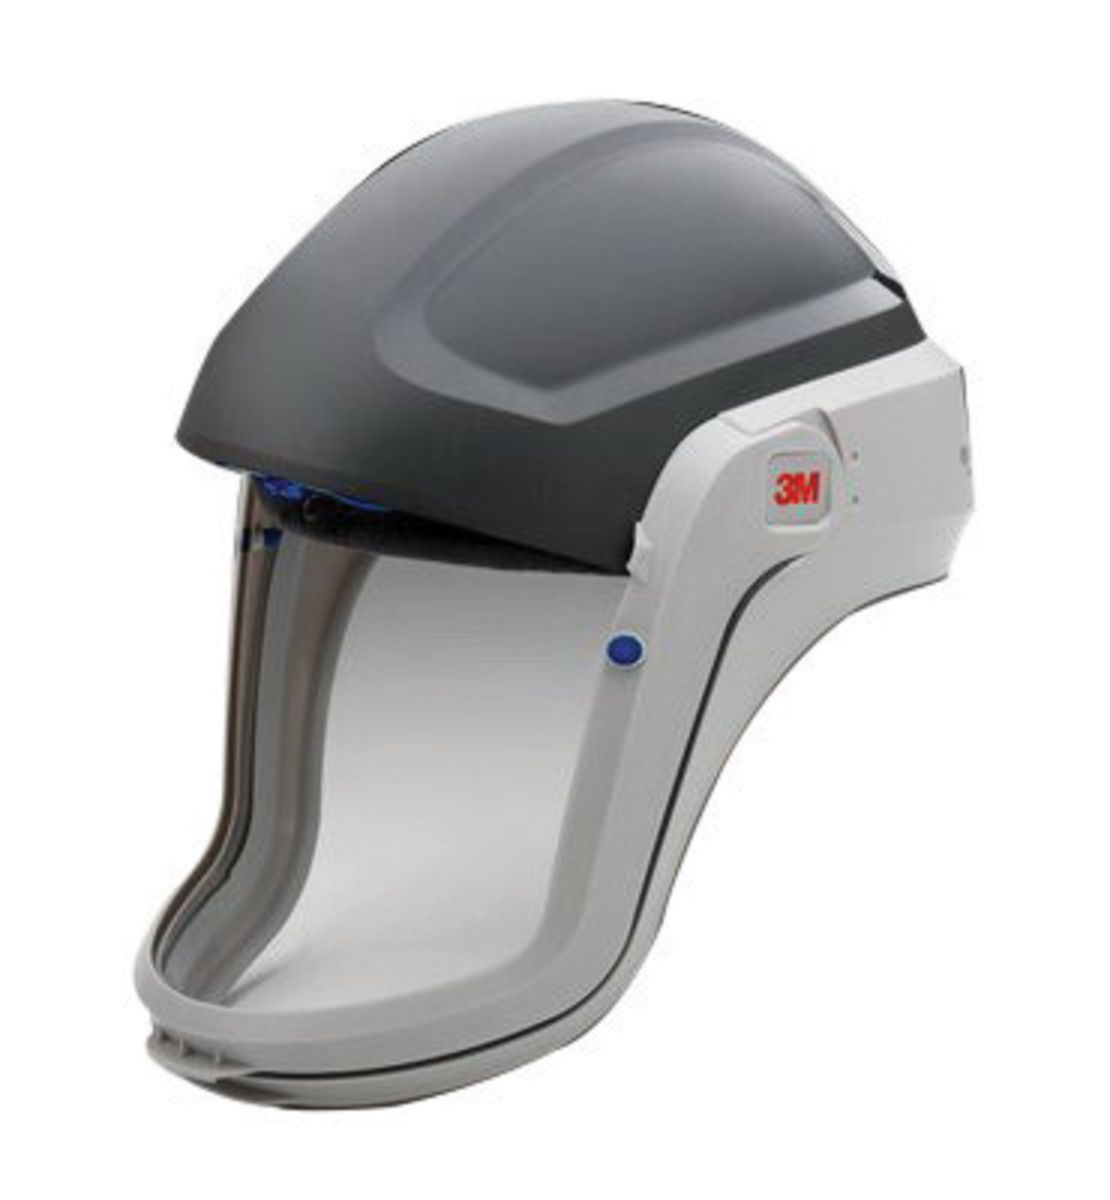 3M™ Polycarbonate Respiratory Helmet For 3M™ Versaflo™ M-100, V Series And TR-300 Full Face Respirator (Without Visor And Shroud